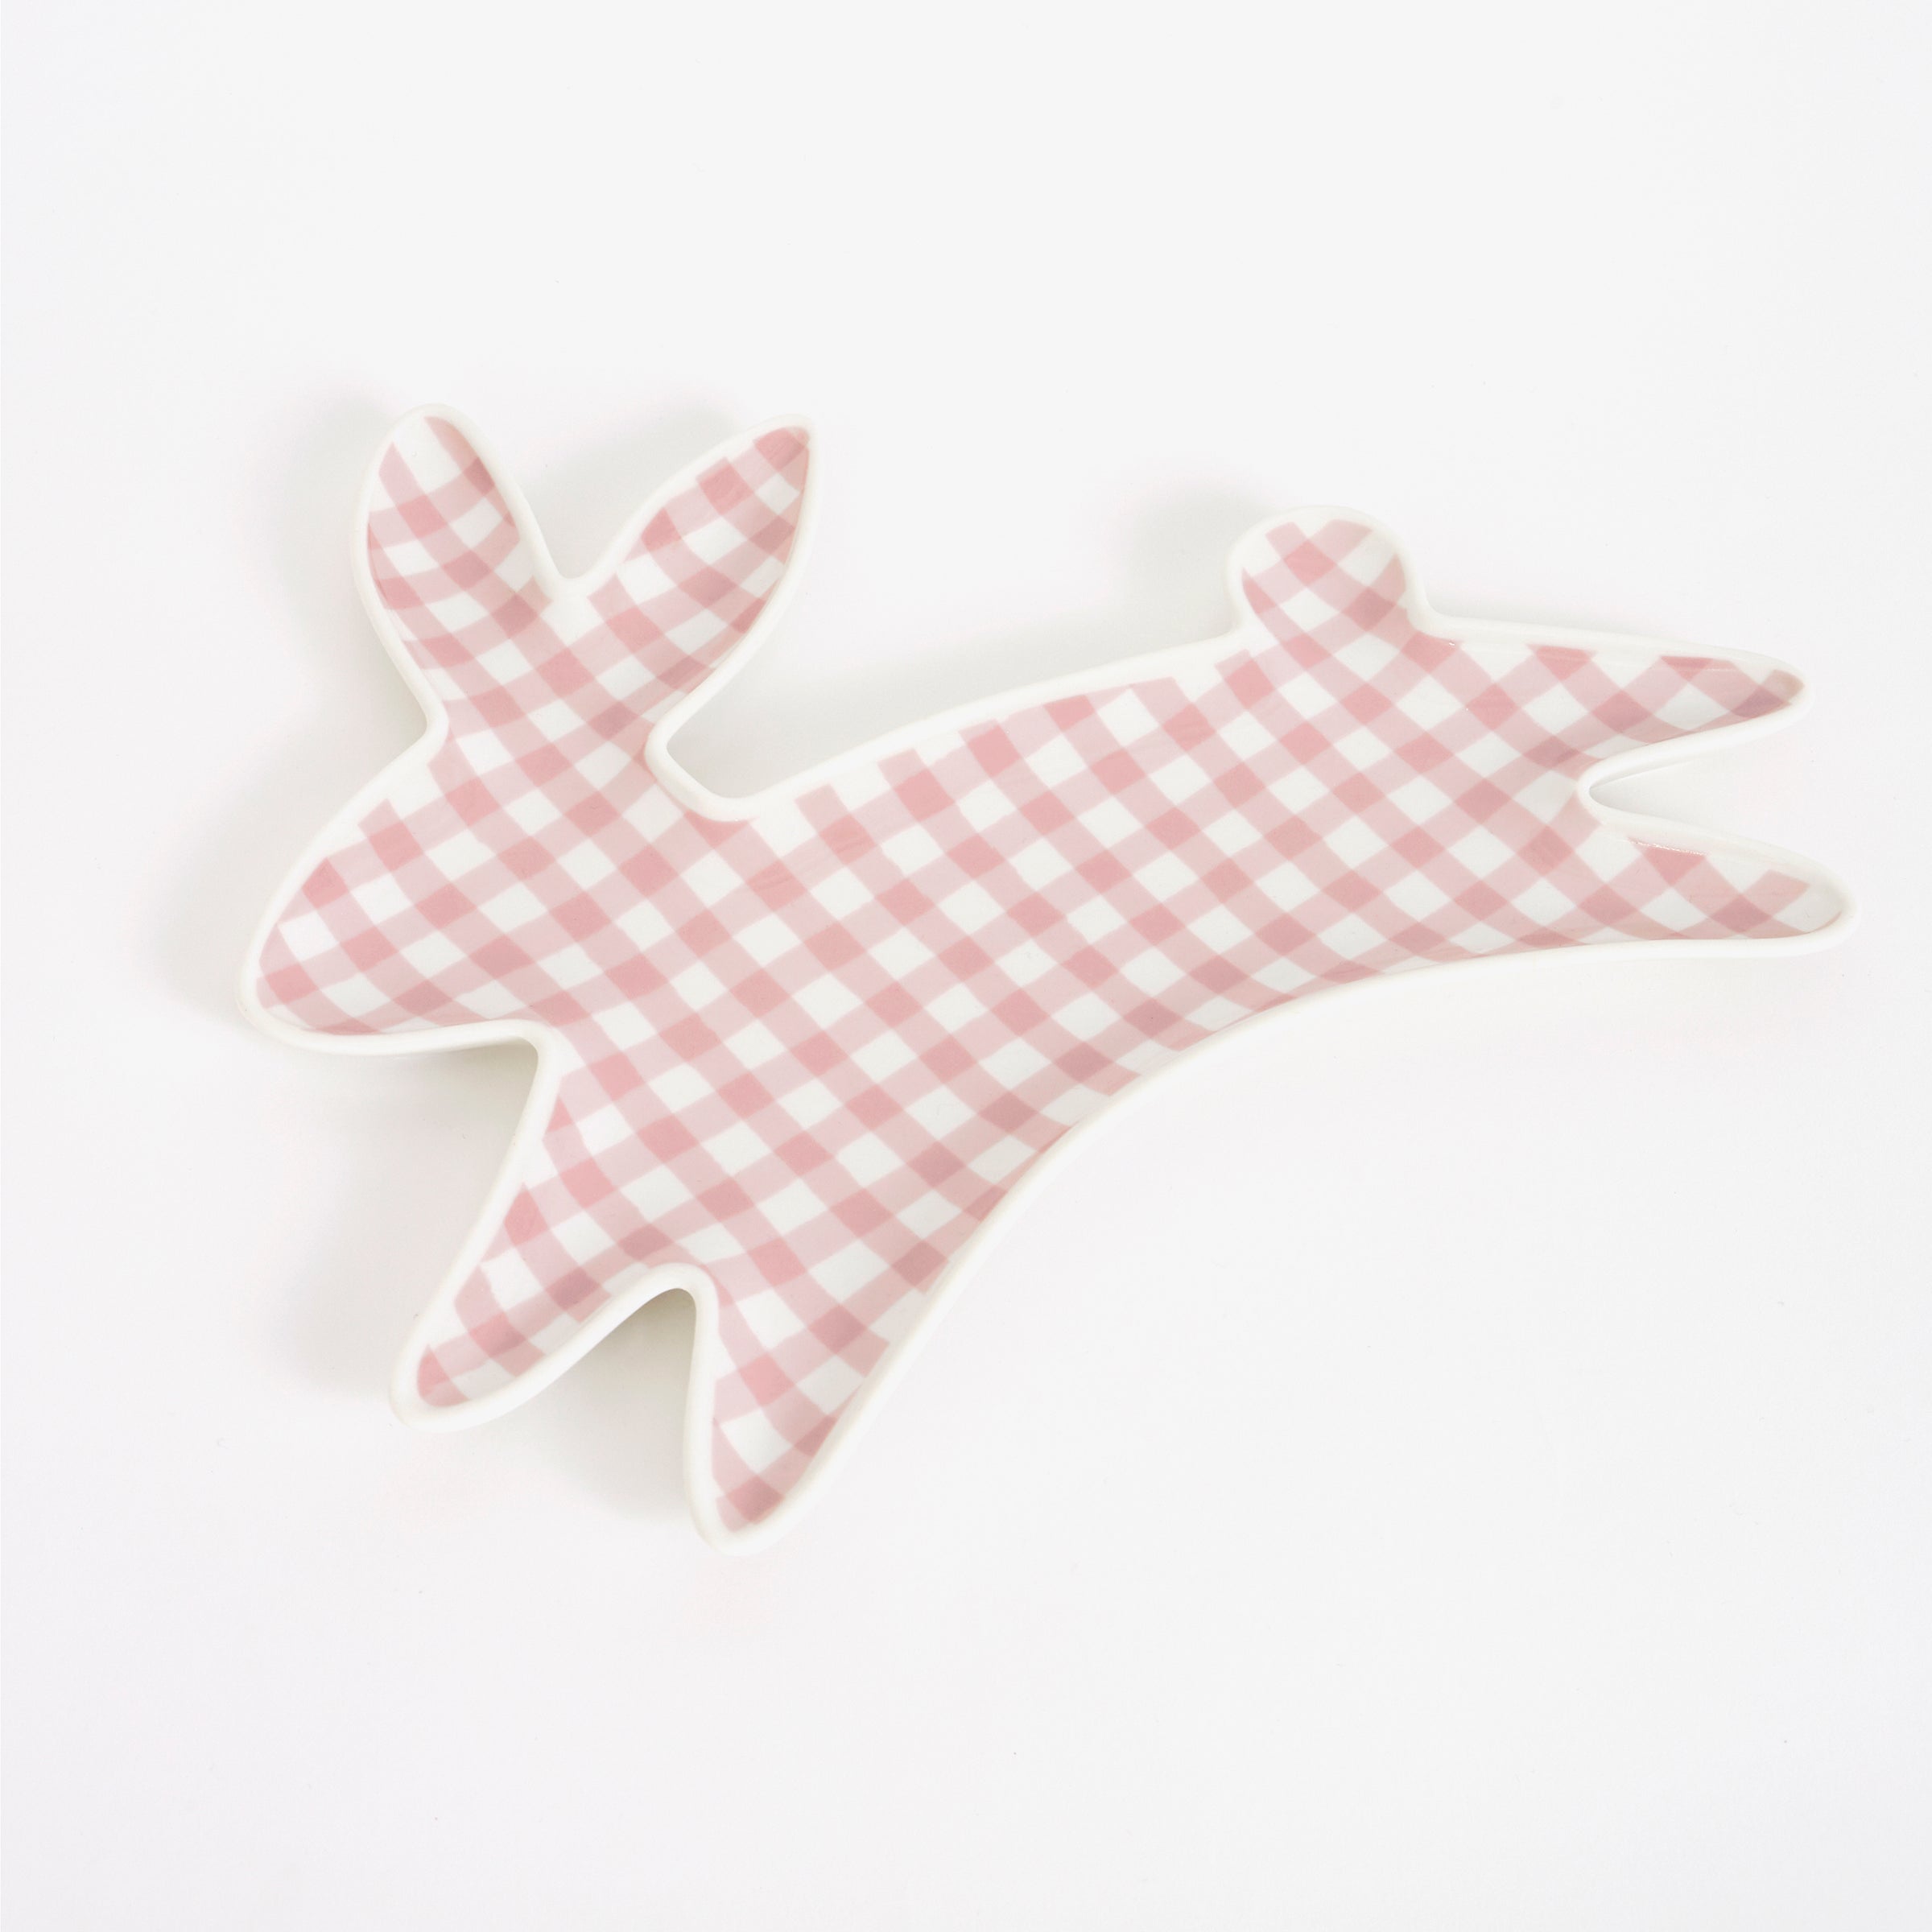 Resuable porcelain plates for parties with an on-trend gingham design and an adorable bunny shape.